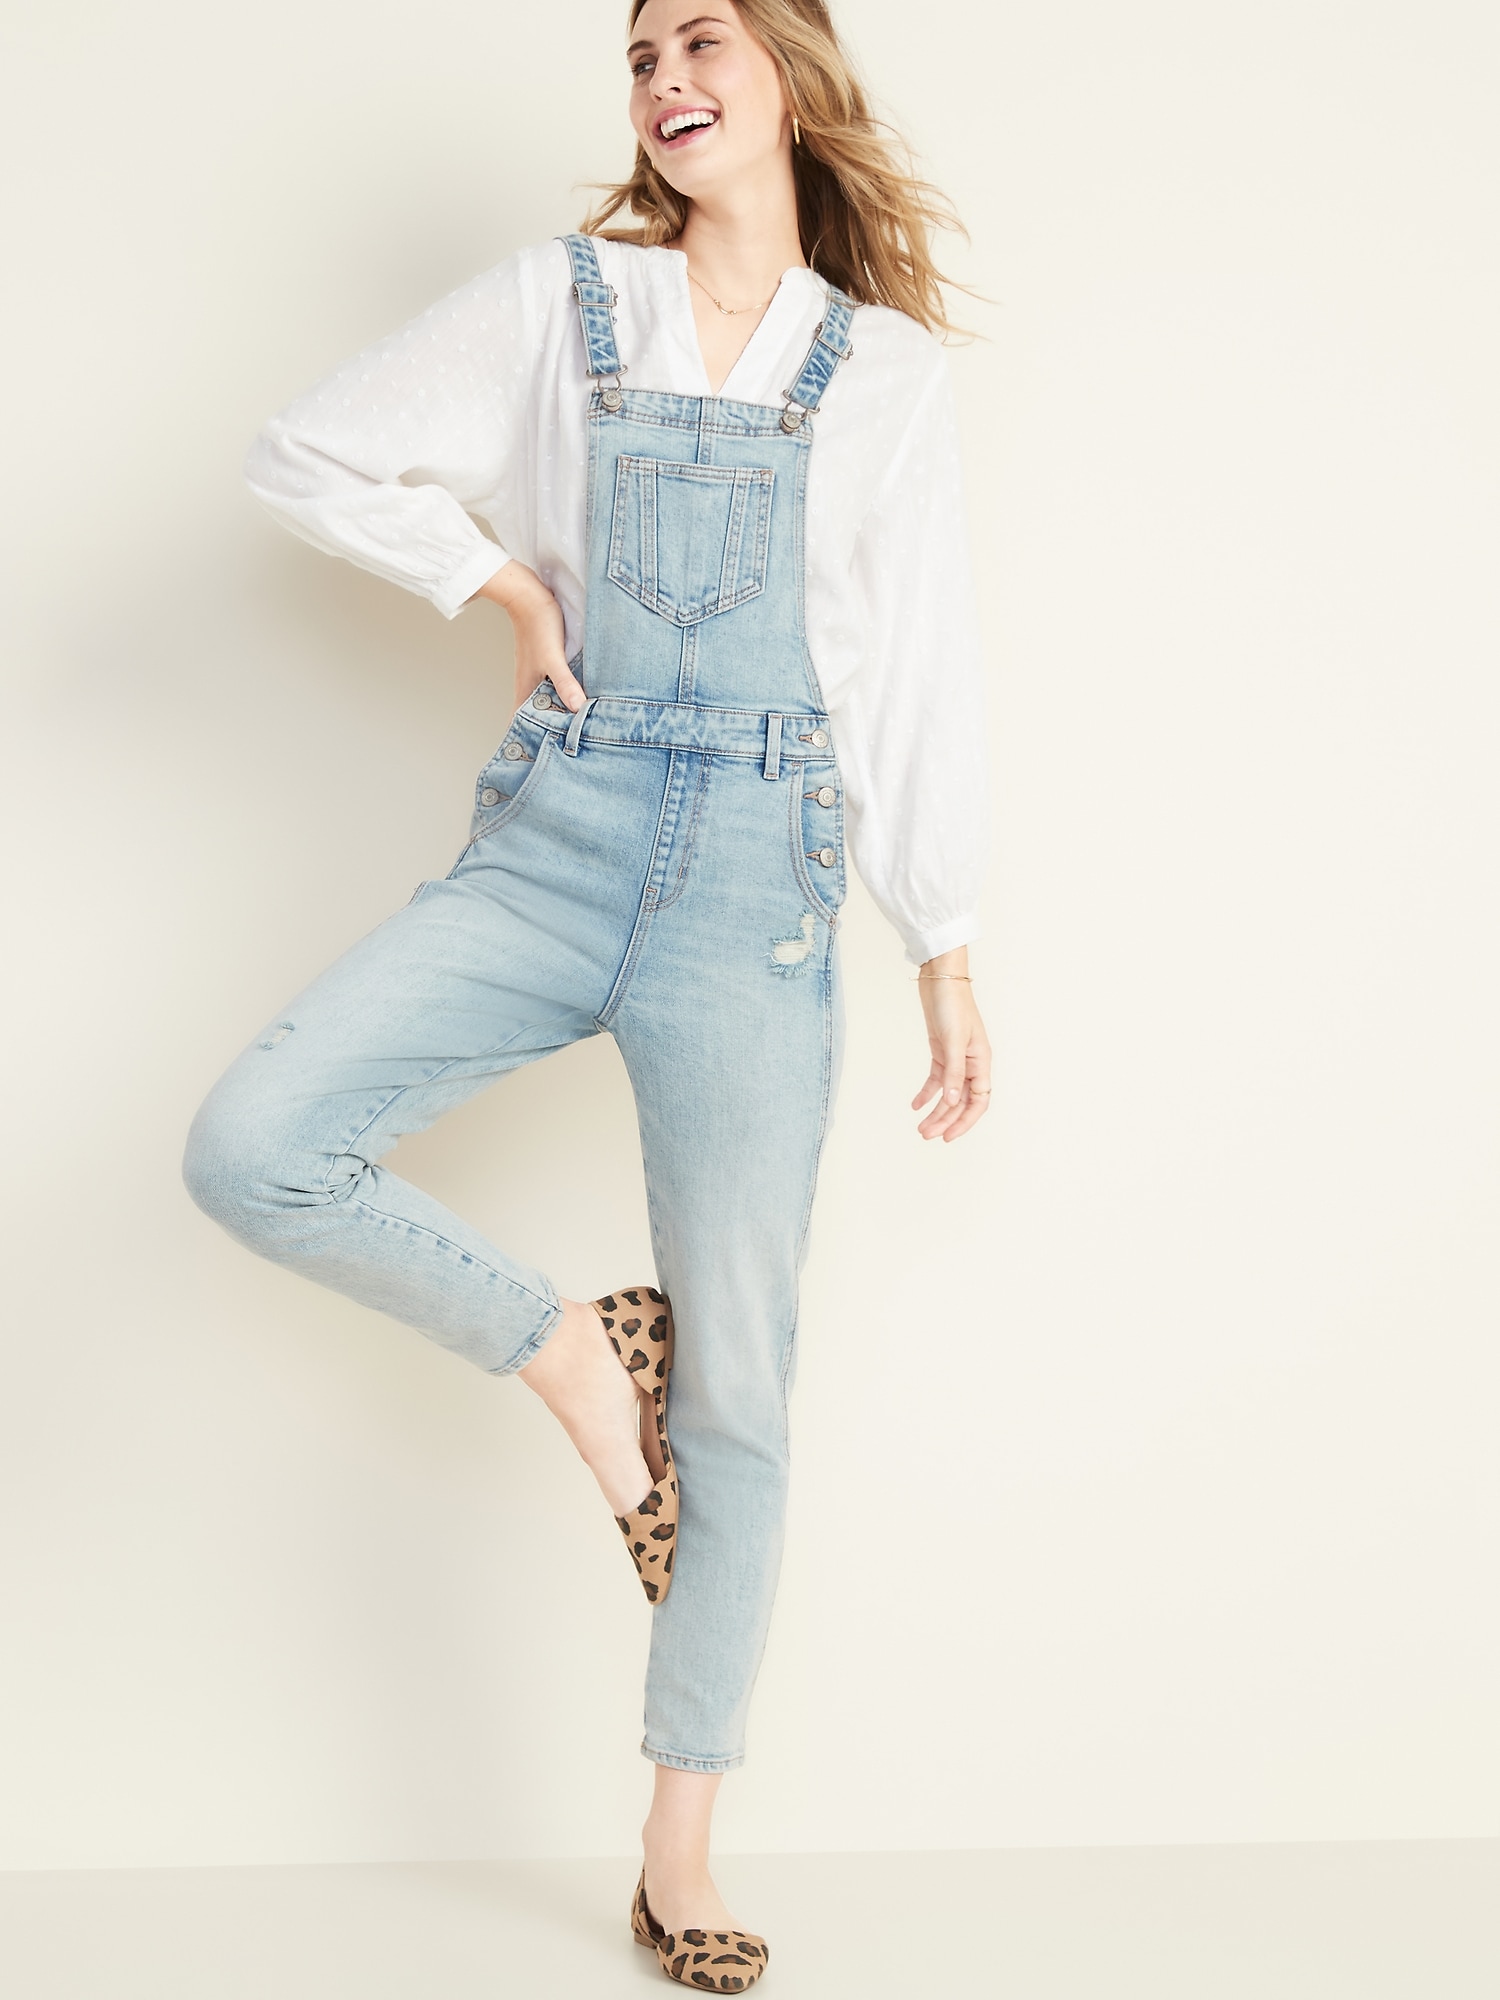 overalls for tall girls